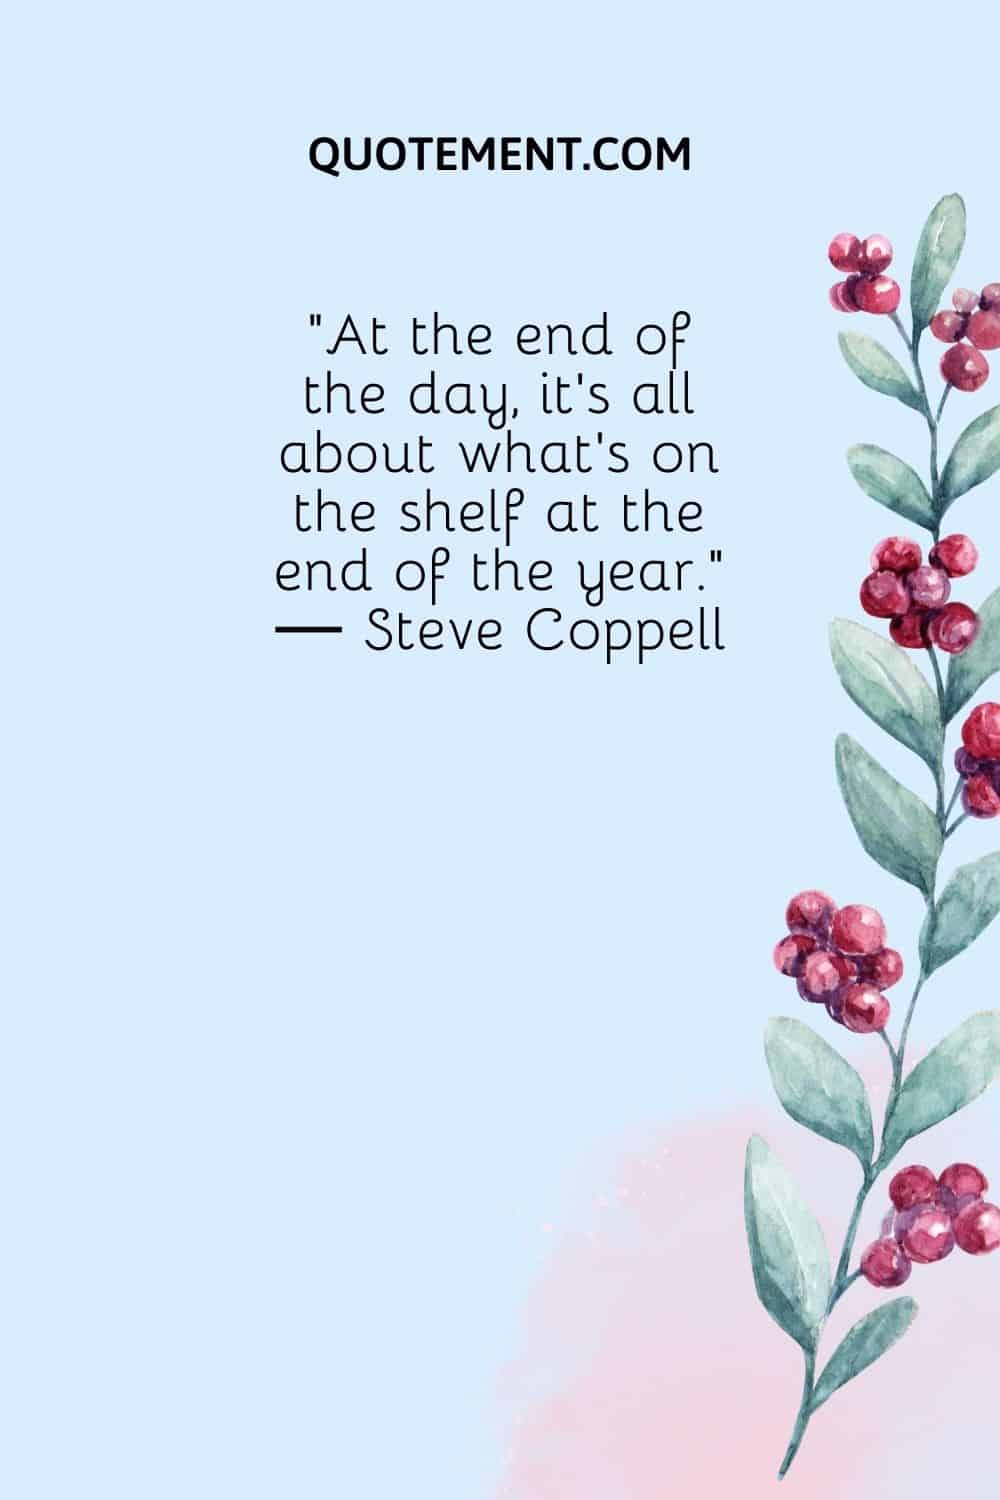 “At the end of the day, it’s all about what’s on the shelf at the end of the year.” ― Steve Coppell